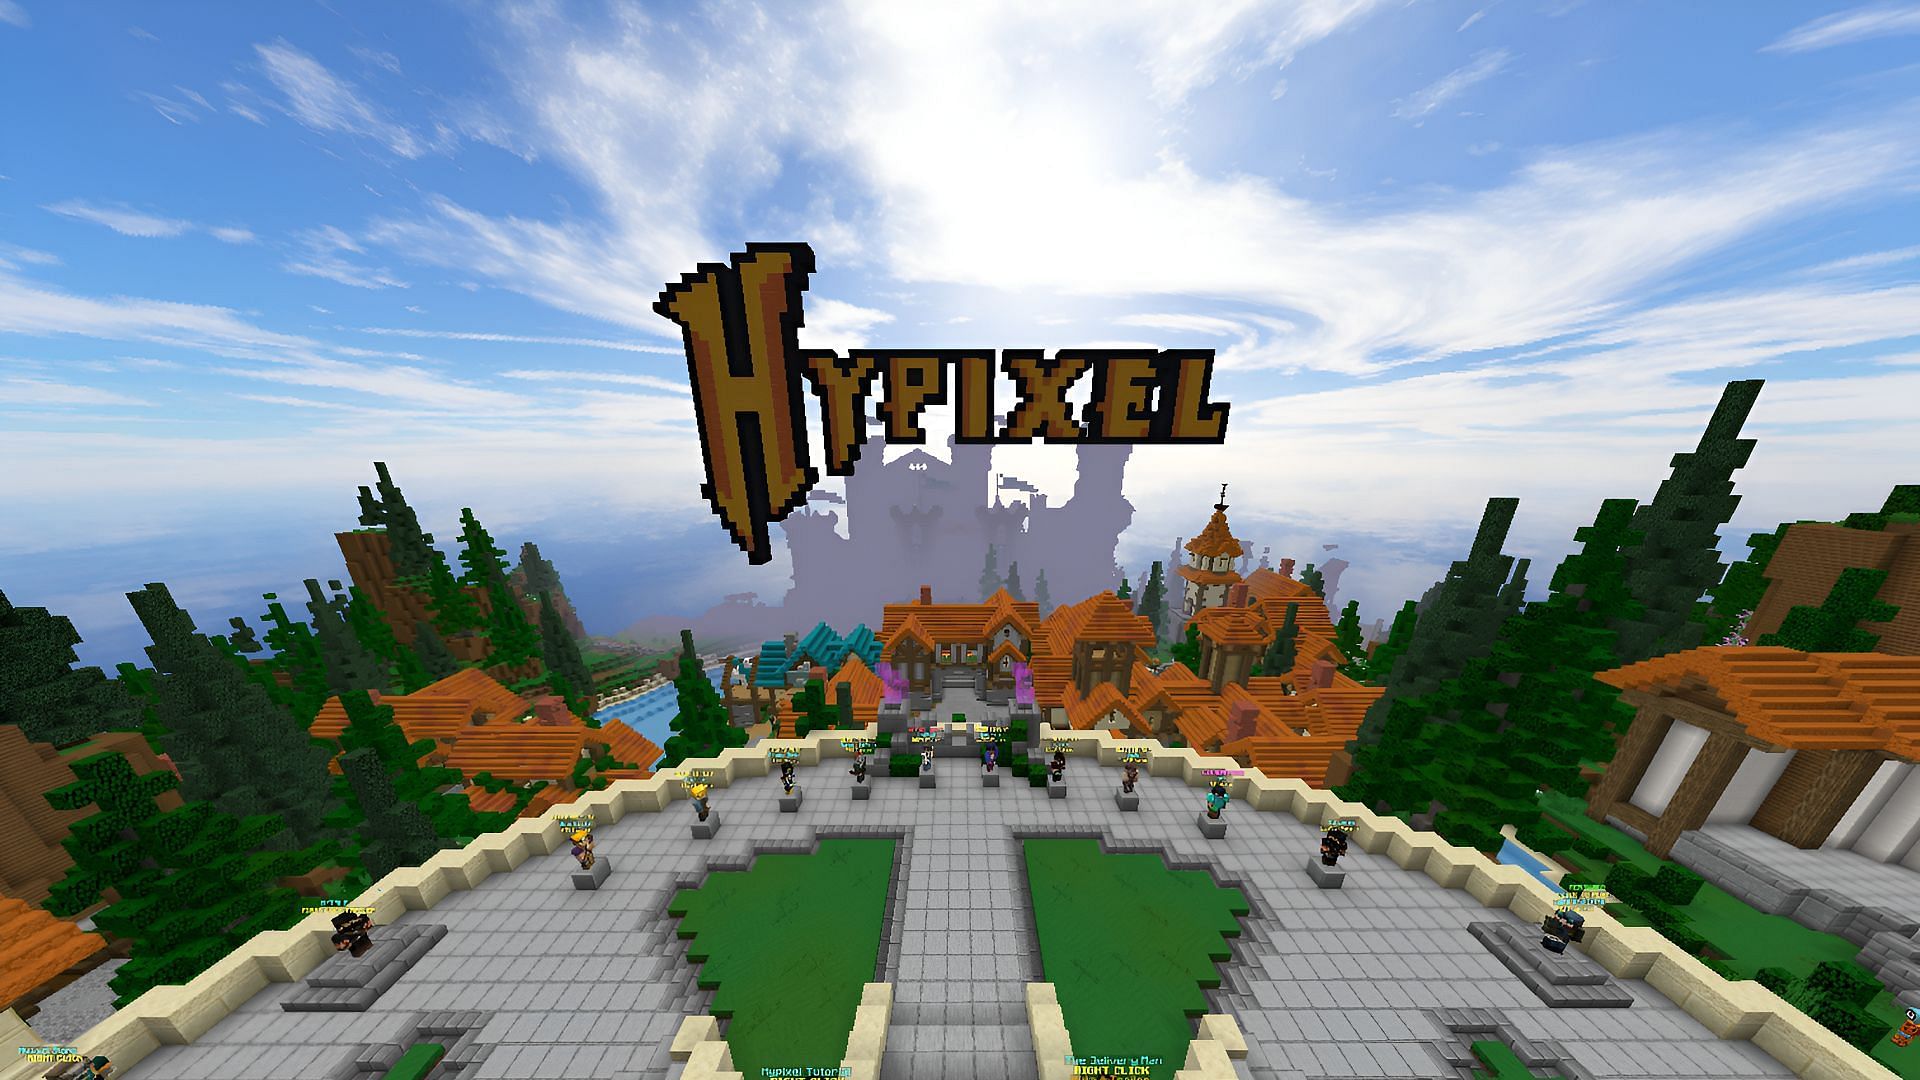 Thousands of fans converge on Hypixel every day (Image via Aparting/Hypixel Forums)